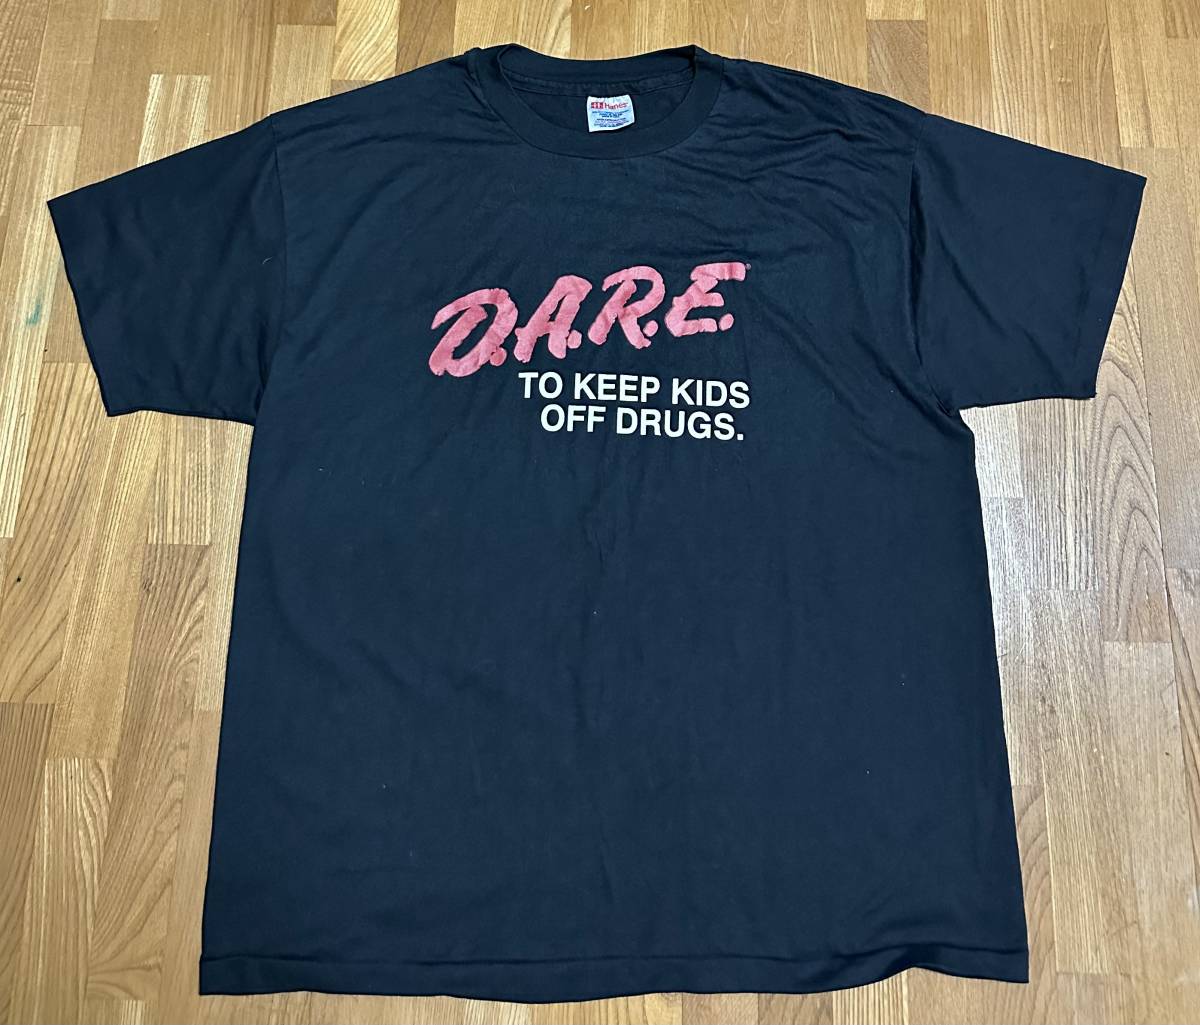 dead stock ！ 80's Vintage Single Stitch DARE D.A.R.E. TO KEEP KIDS OFF DRUGS t-shirt XL_画像5